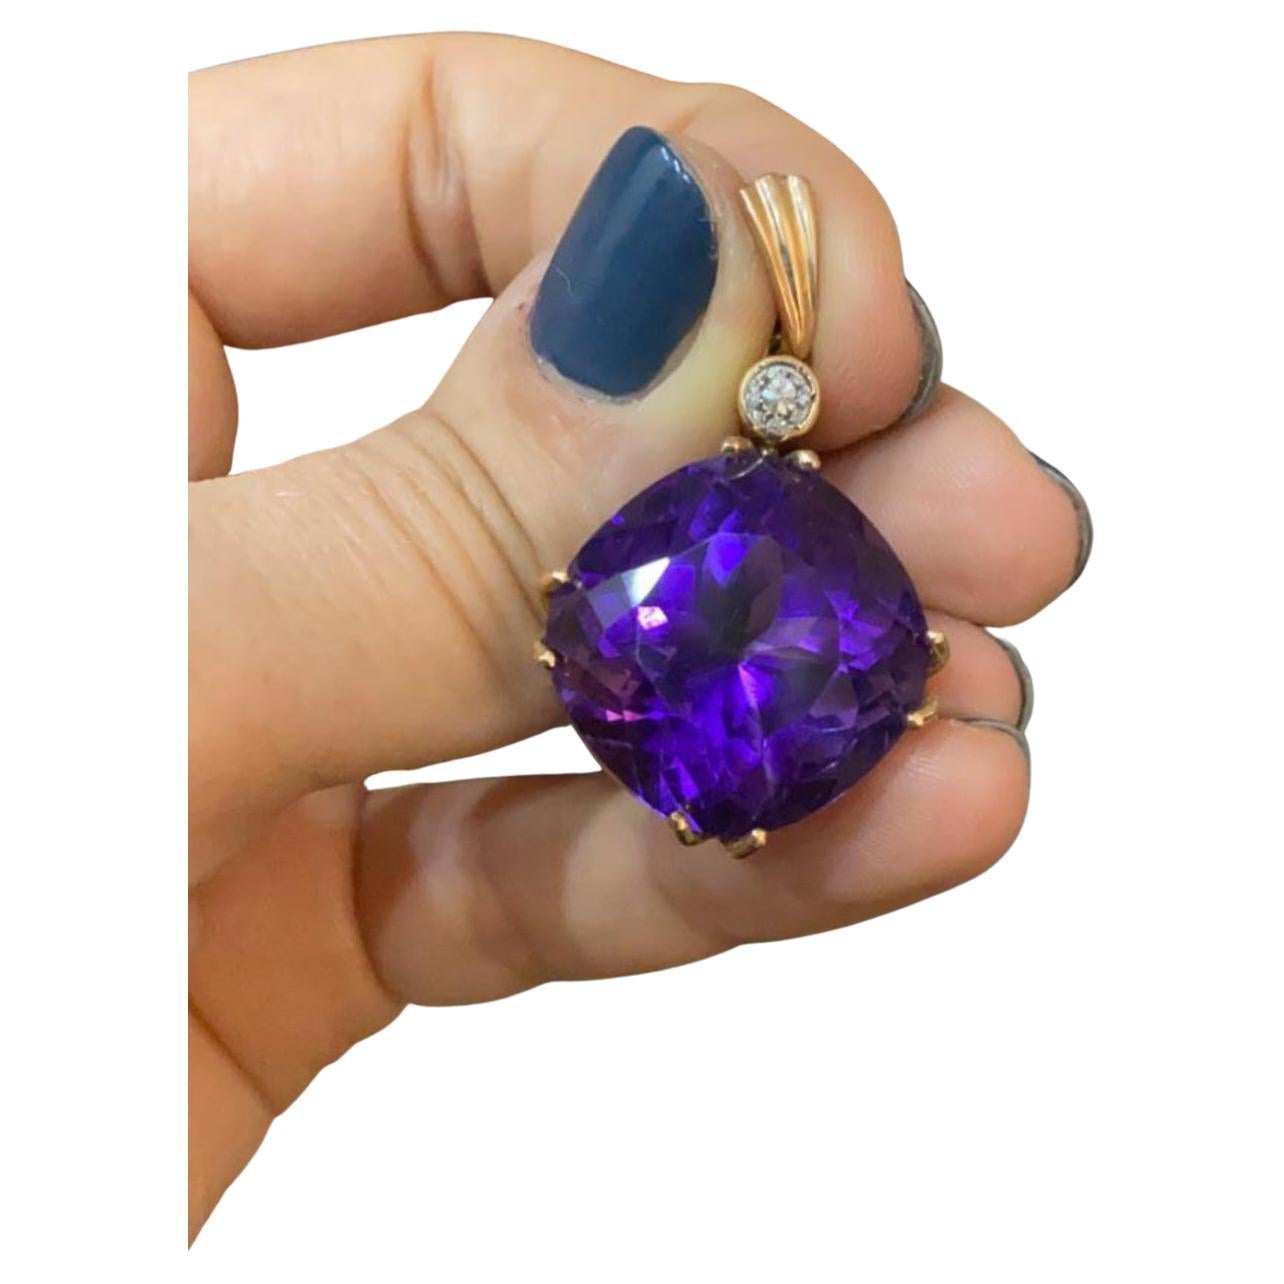 Antique 14k gold russian large purple colour amethyst with a diameter of 19.85mm×19.85mm in open work style 14k gold setting toped with 1 old mine cut diamond hall marked 56 imperial russian gold standard and initial maker mark